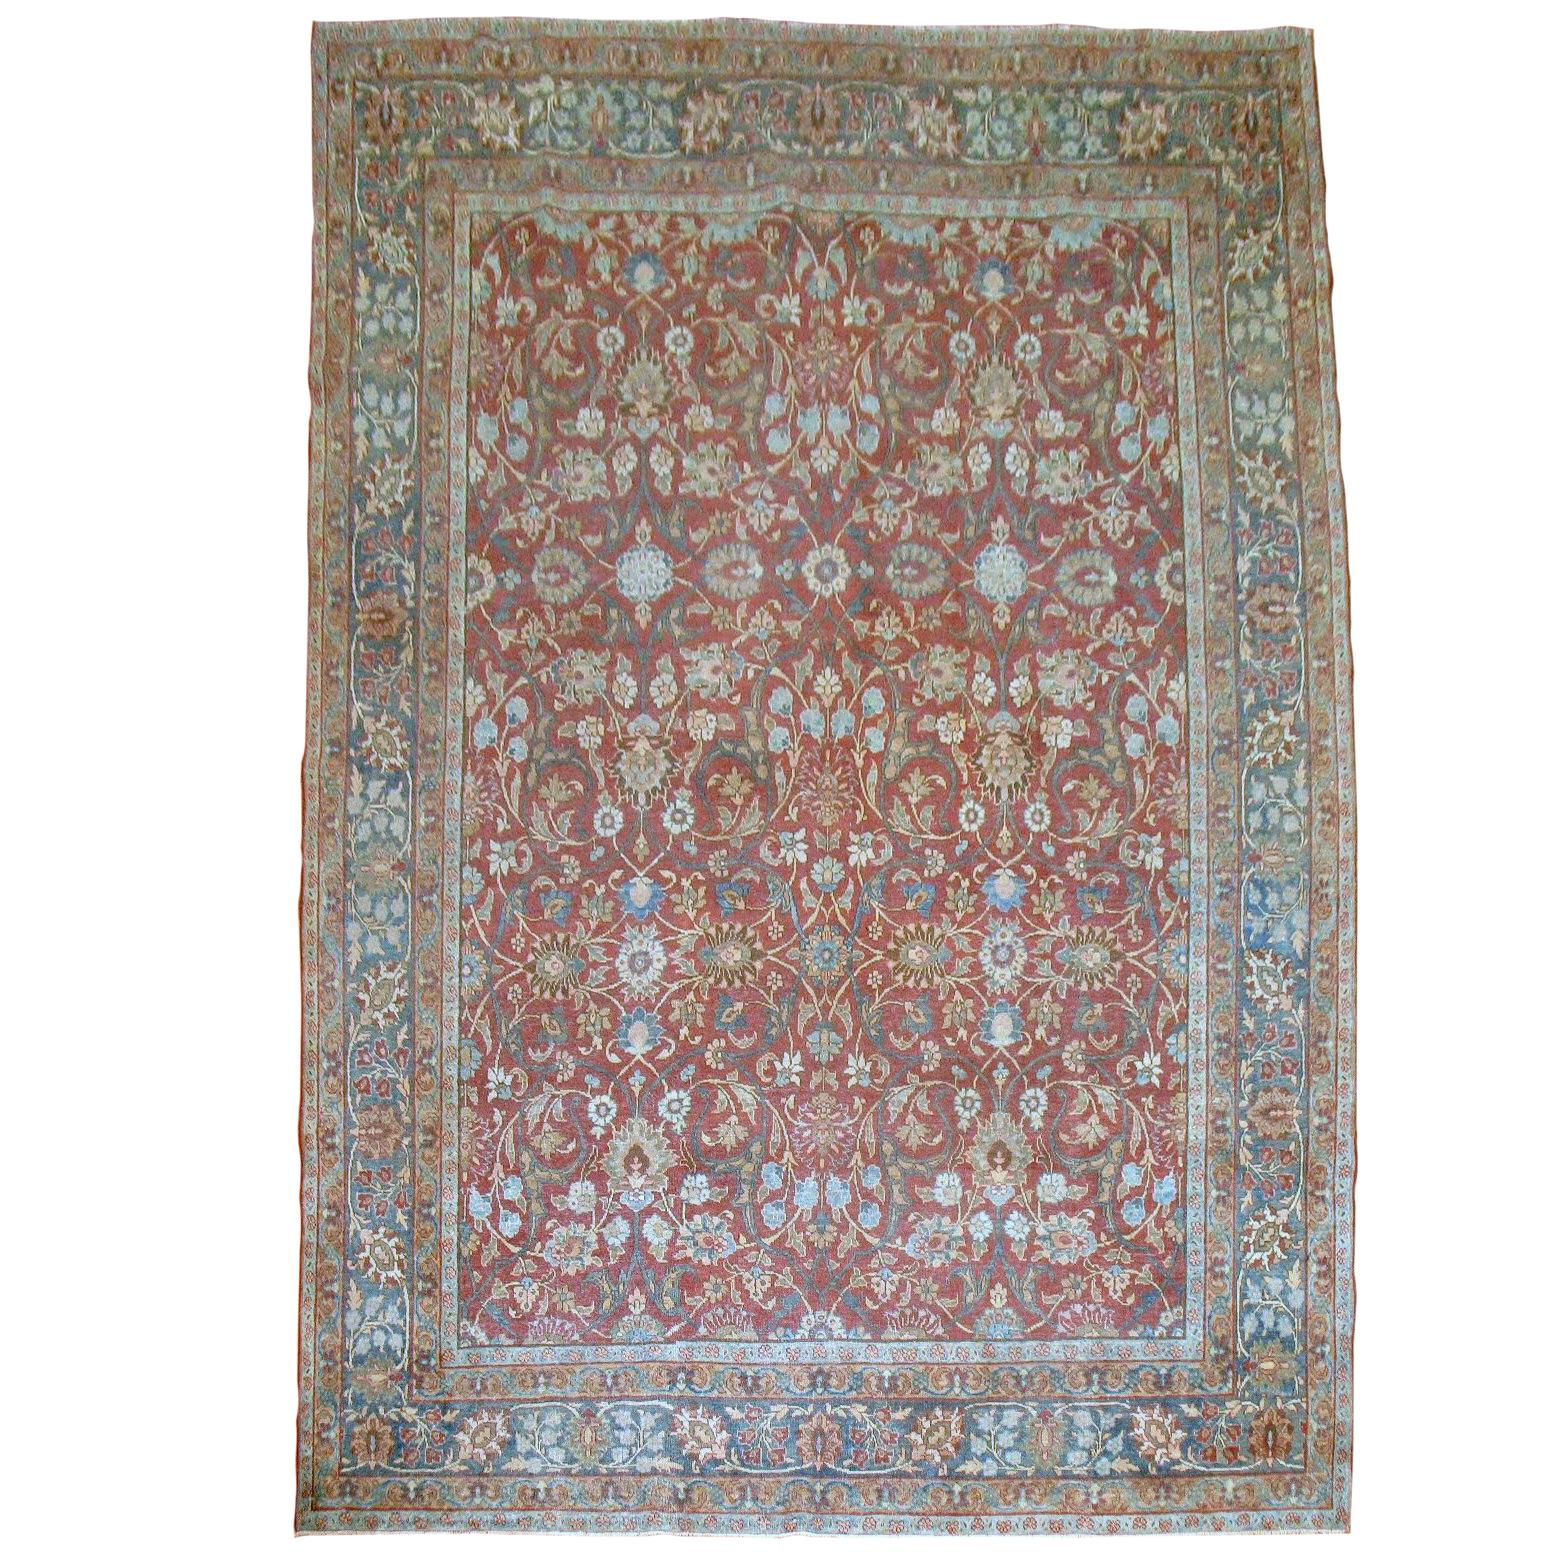 An authentic room-size handmade Persian Tabriz rug. Red field, various shades of blues and greens.

7'9'' x 11'4''